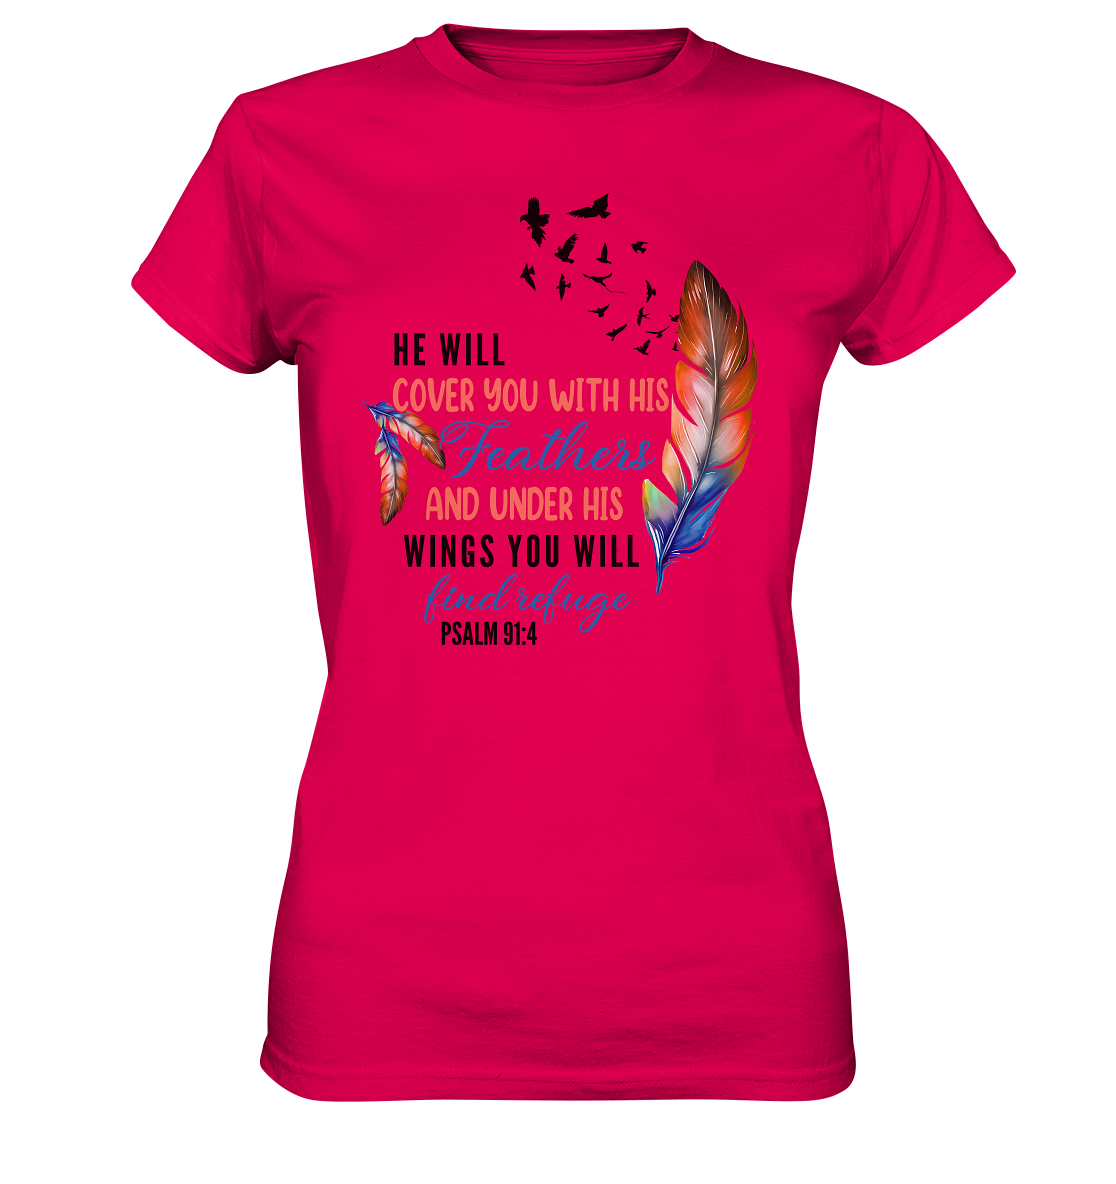 Psalm 91:4 - He will cover you with his Feathers - Ladies Premium Shirt